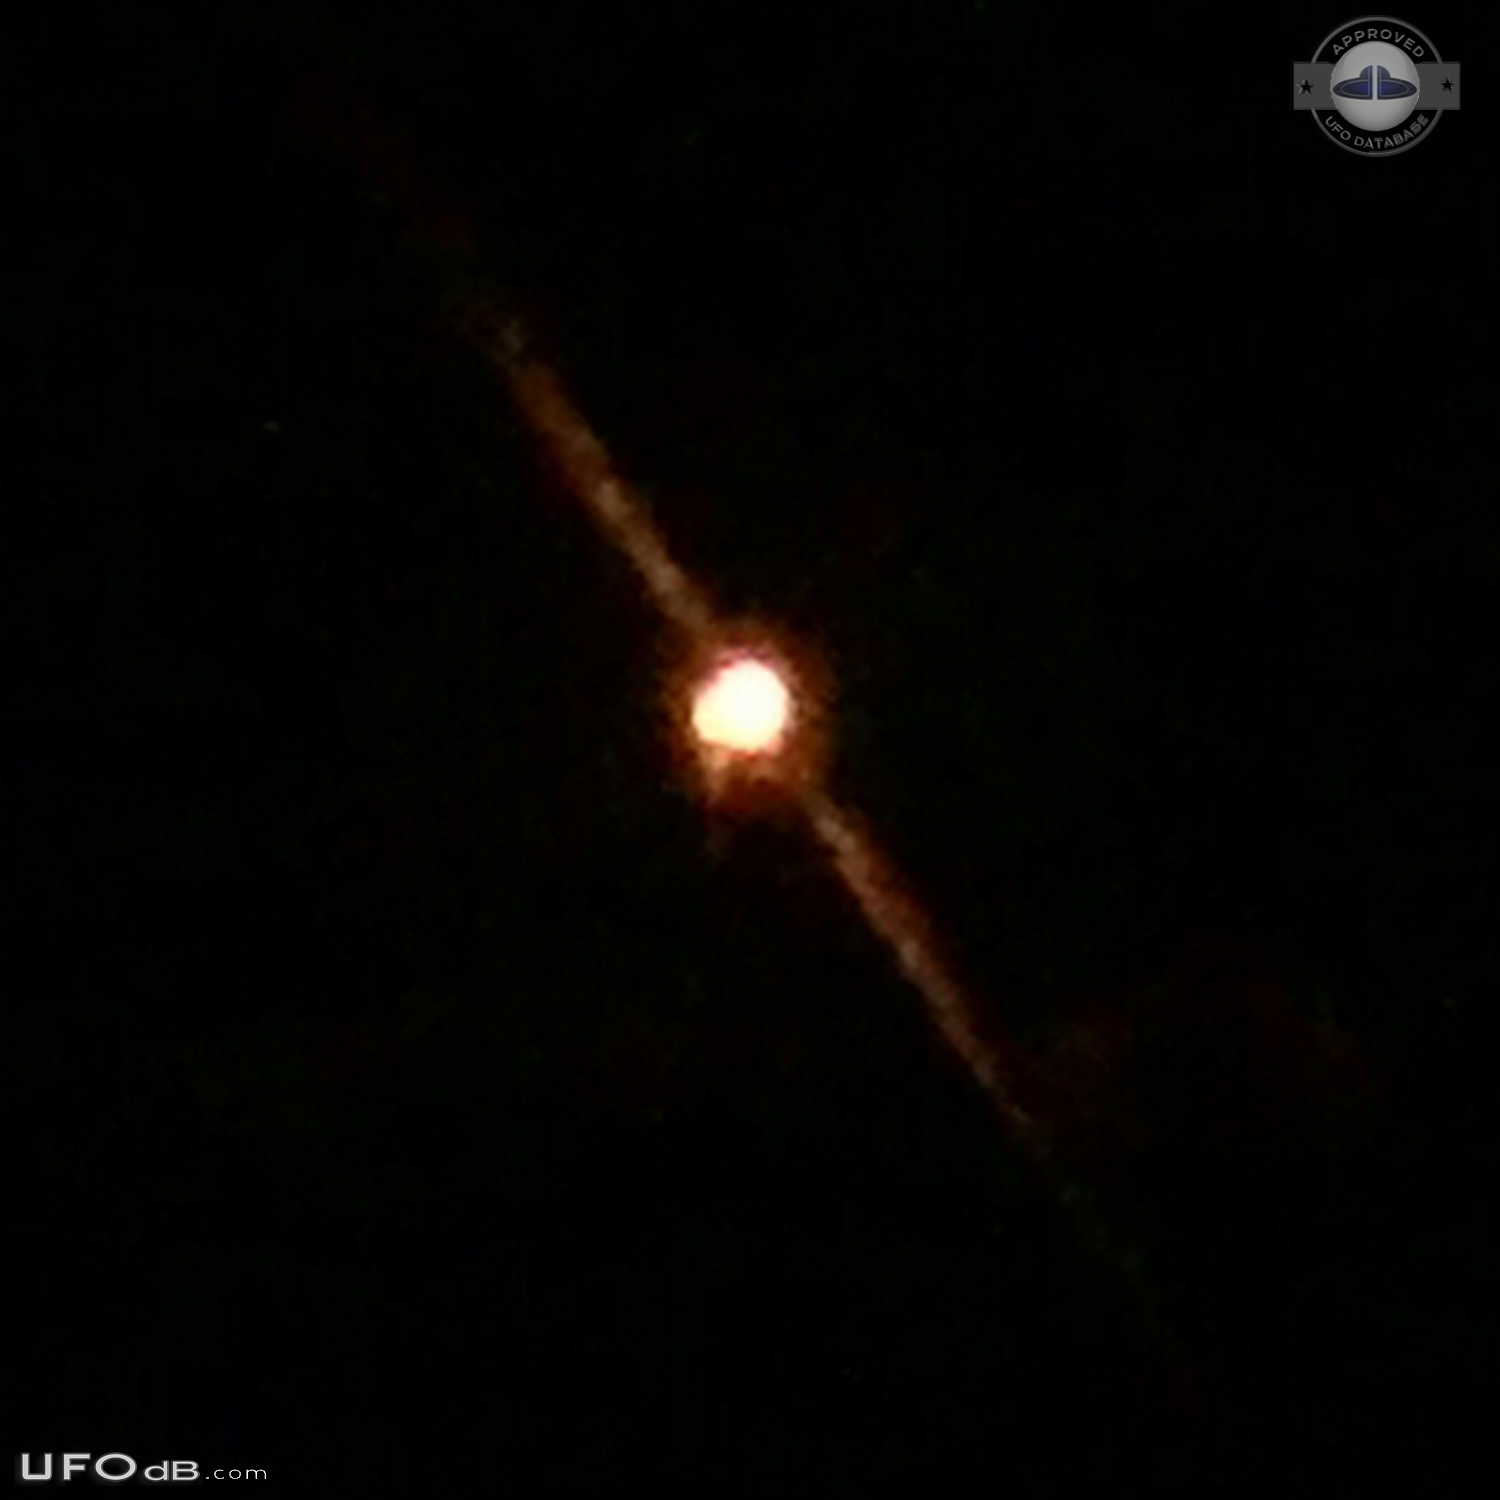 2 different UFOs - black and silhouette triangle and many orbs 2015 UFO Picture #682-2